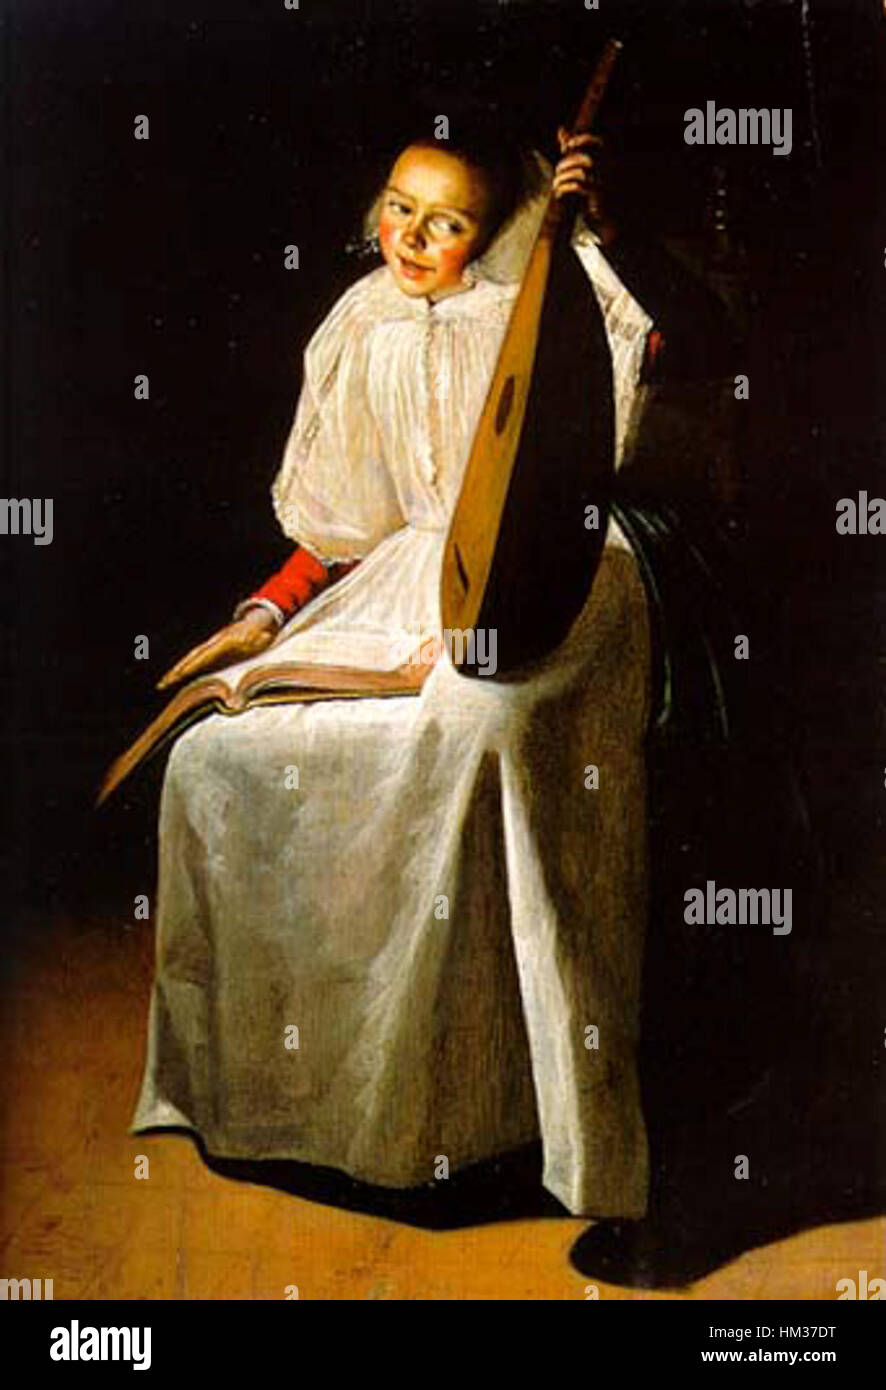 Judith Leyster - A young lady holding a lute with a music score on her lap in a candlelit interior Stock Photo